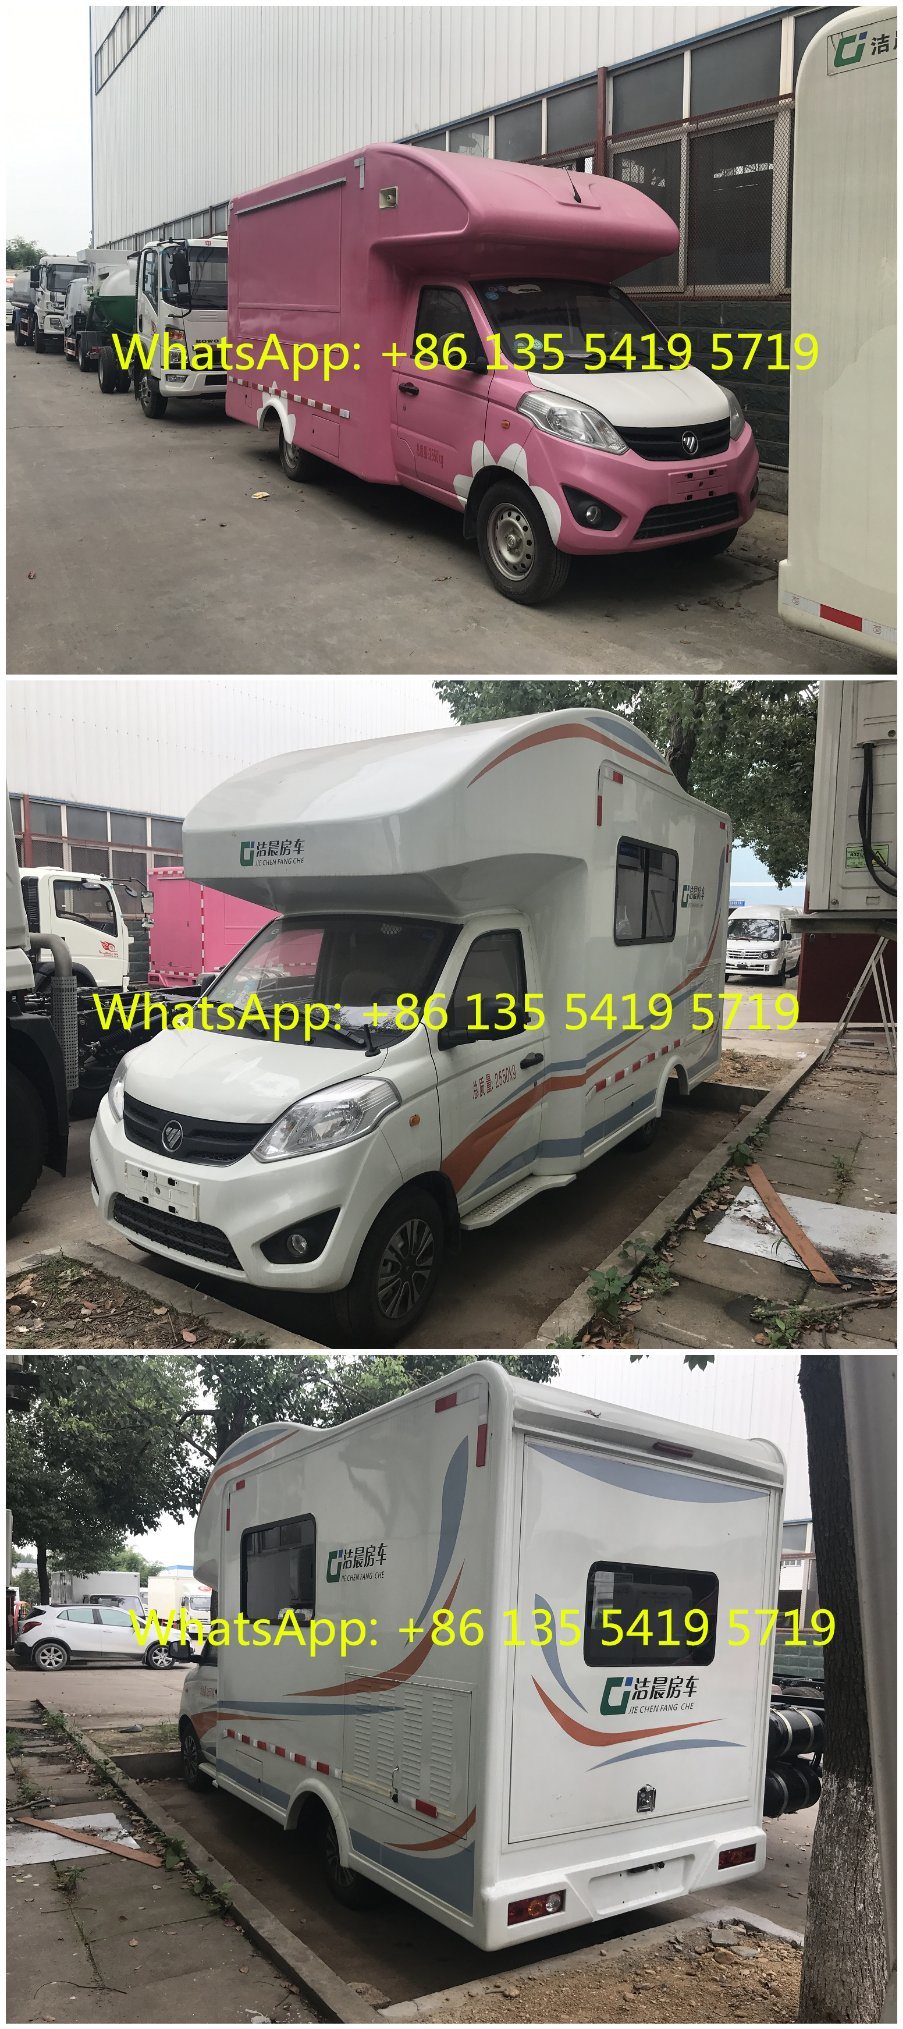 China RV / Caravan / Camper Luxury Vacation Touring Car Recreational Vehicle for Sale